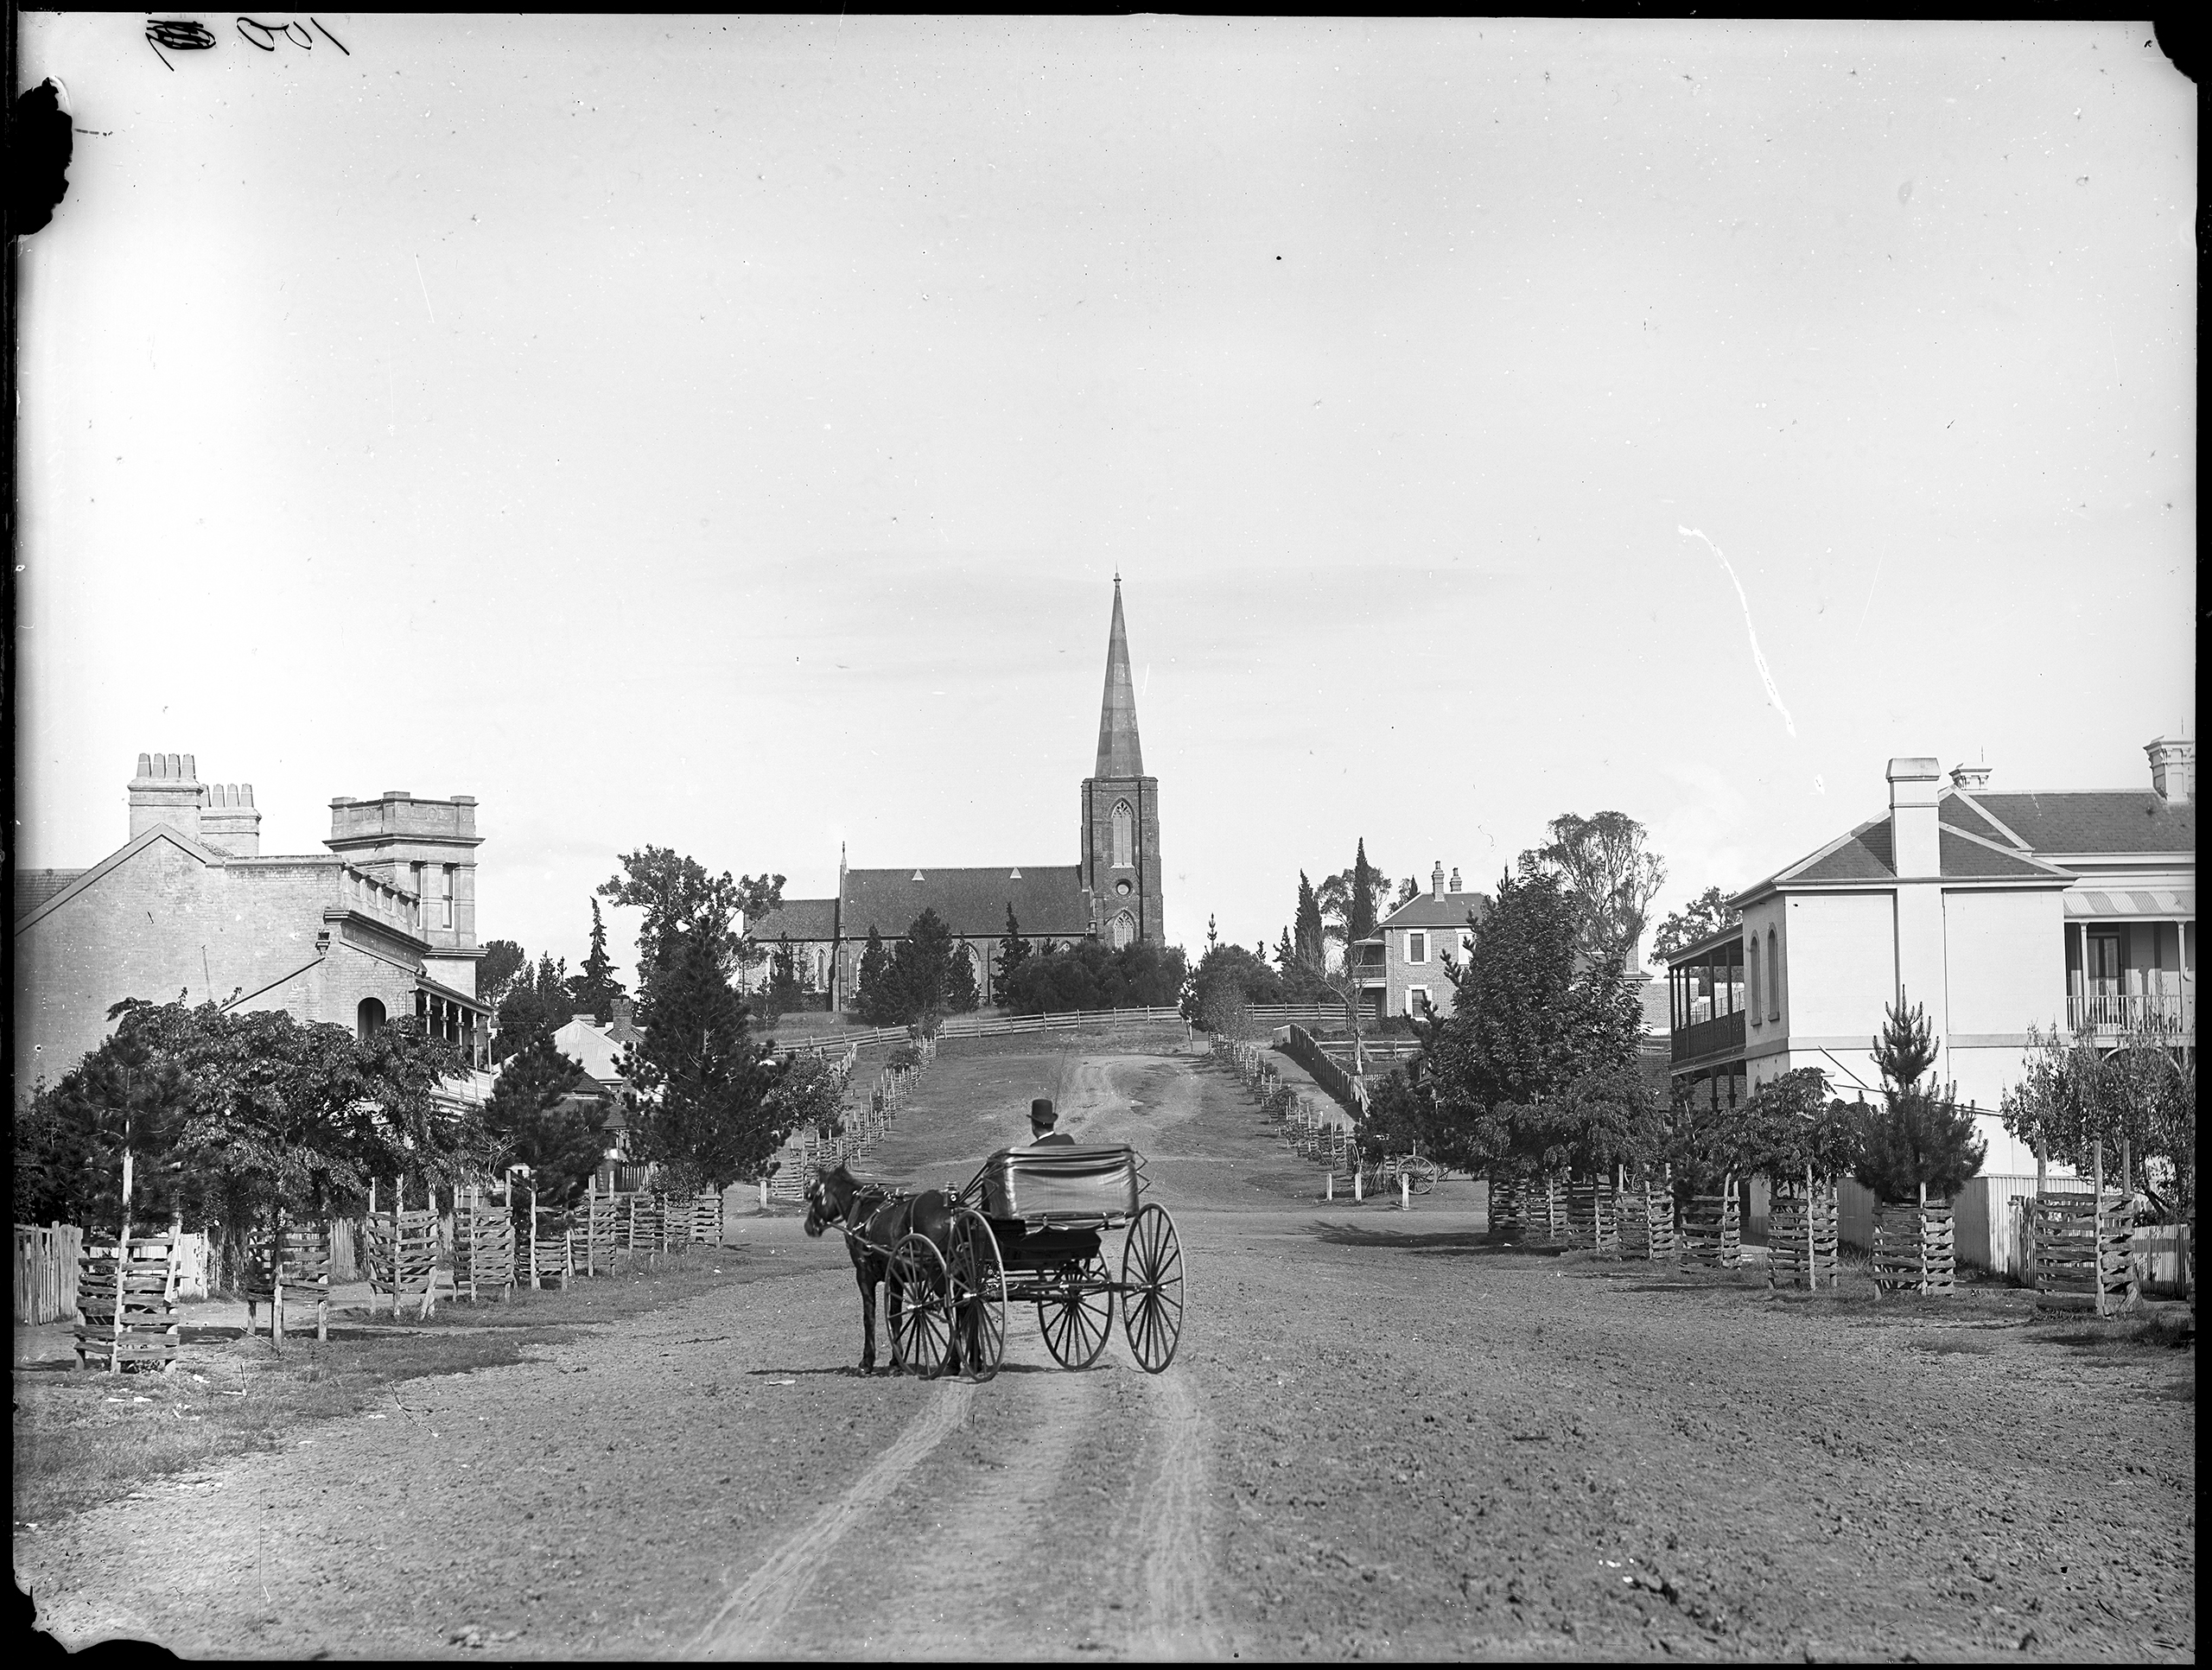 Photograph of Camden, NSW, with St John's Anglican Church